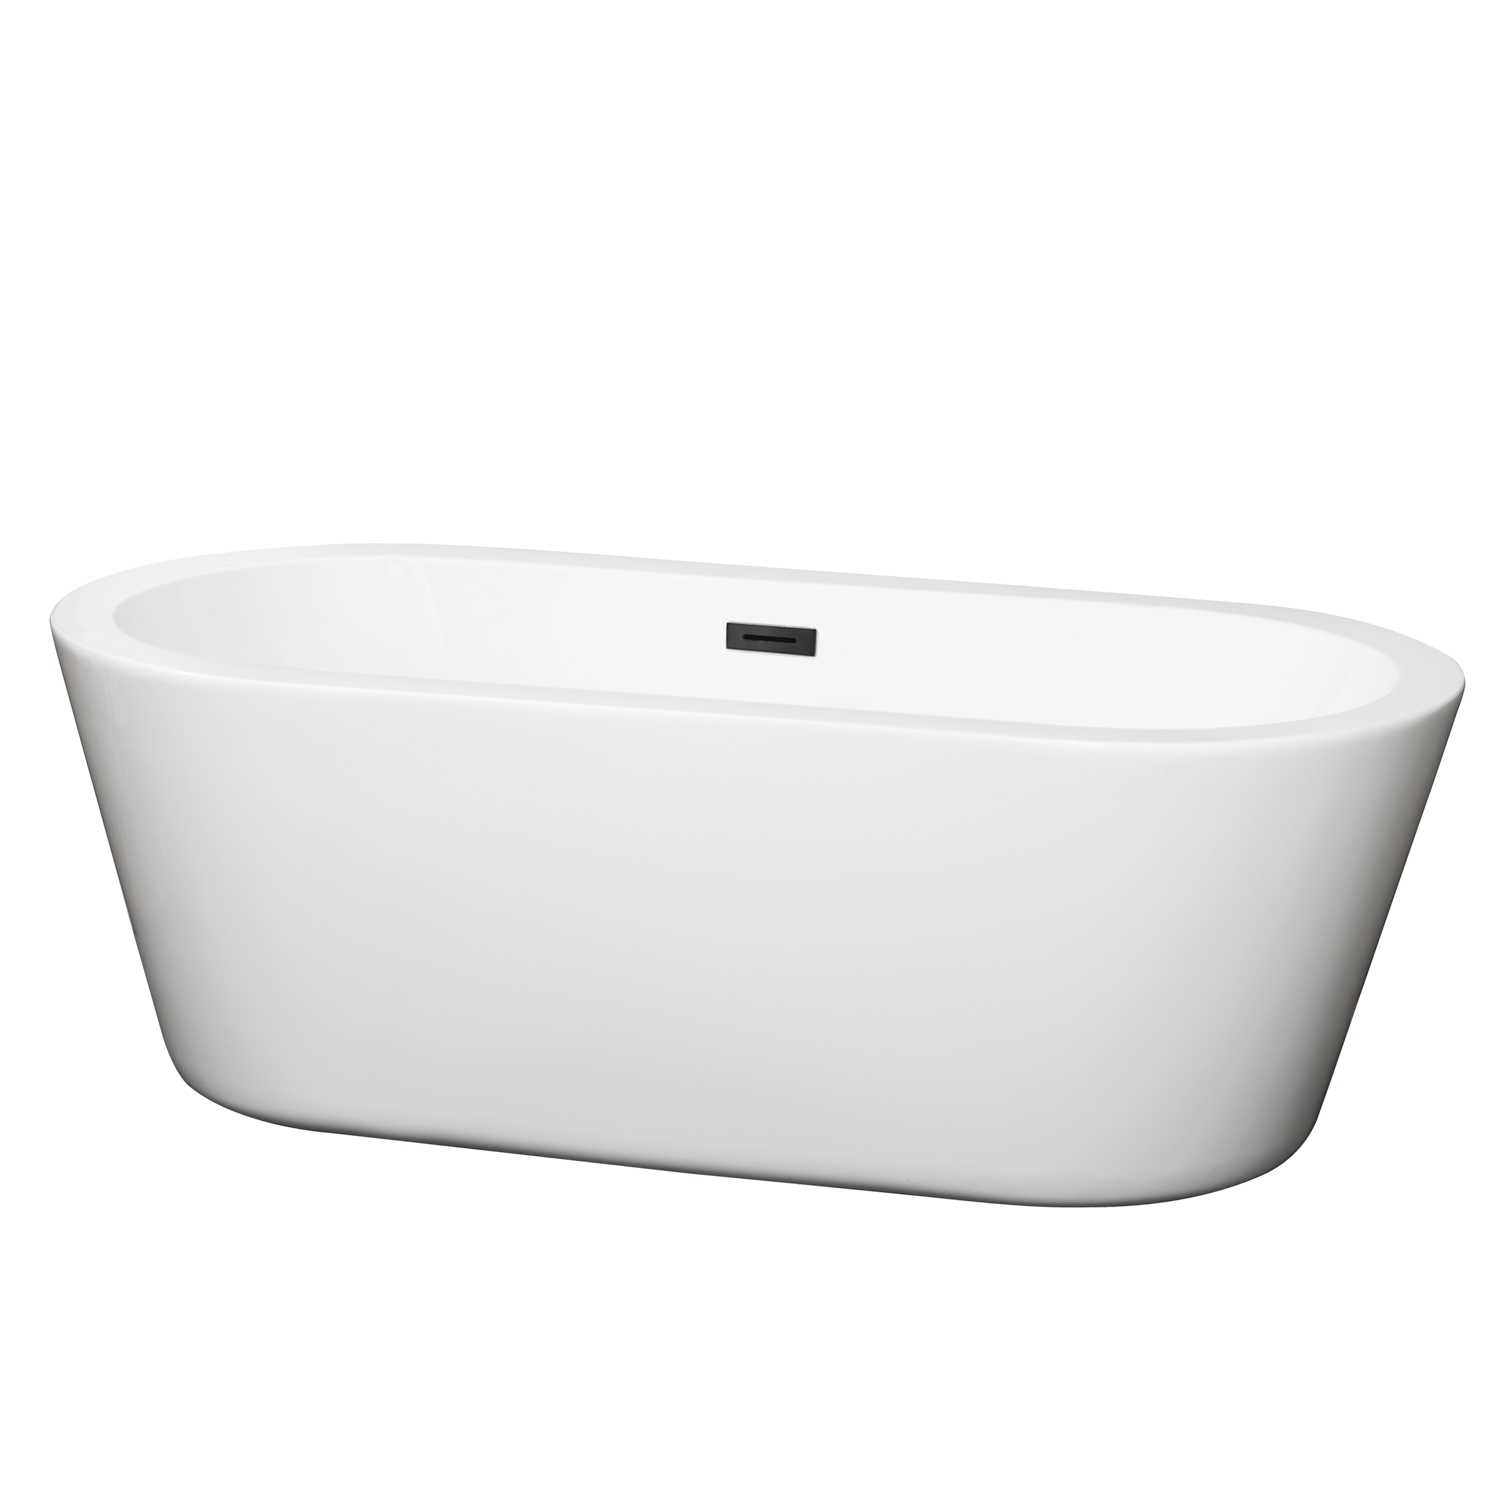 67" Freestanding Bathtub in White with Matte Black Pop-Up Drain and Overflow Trim